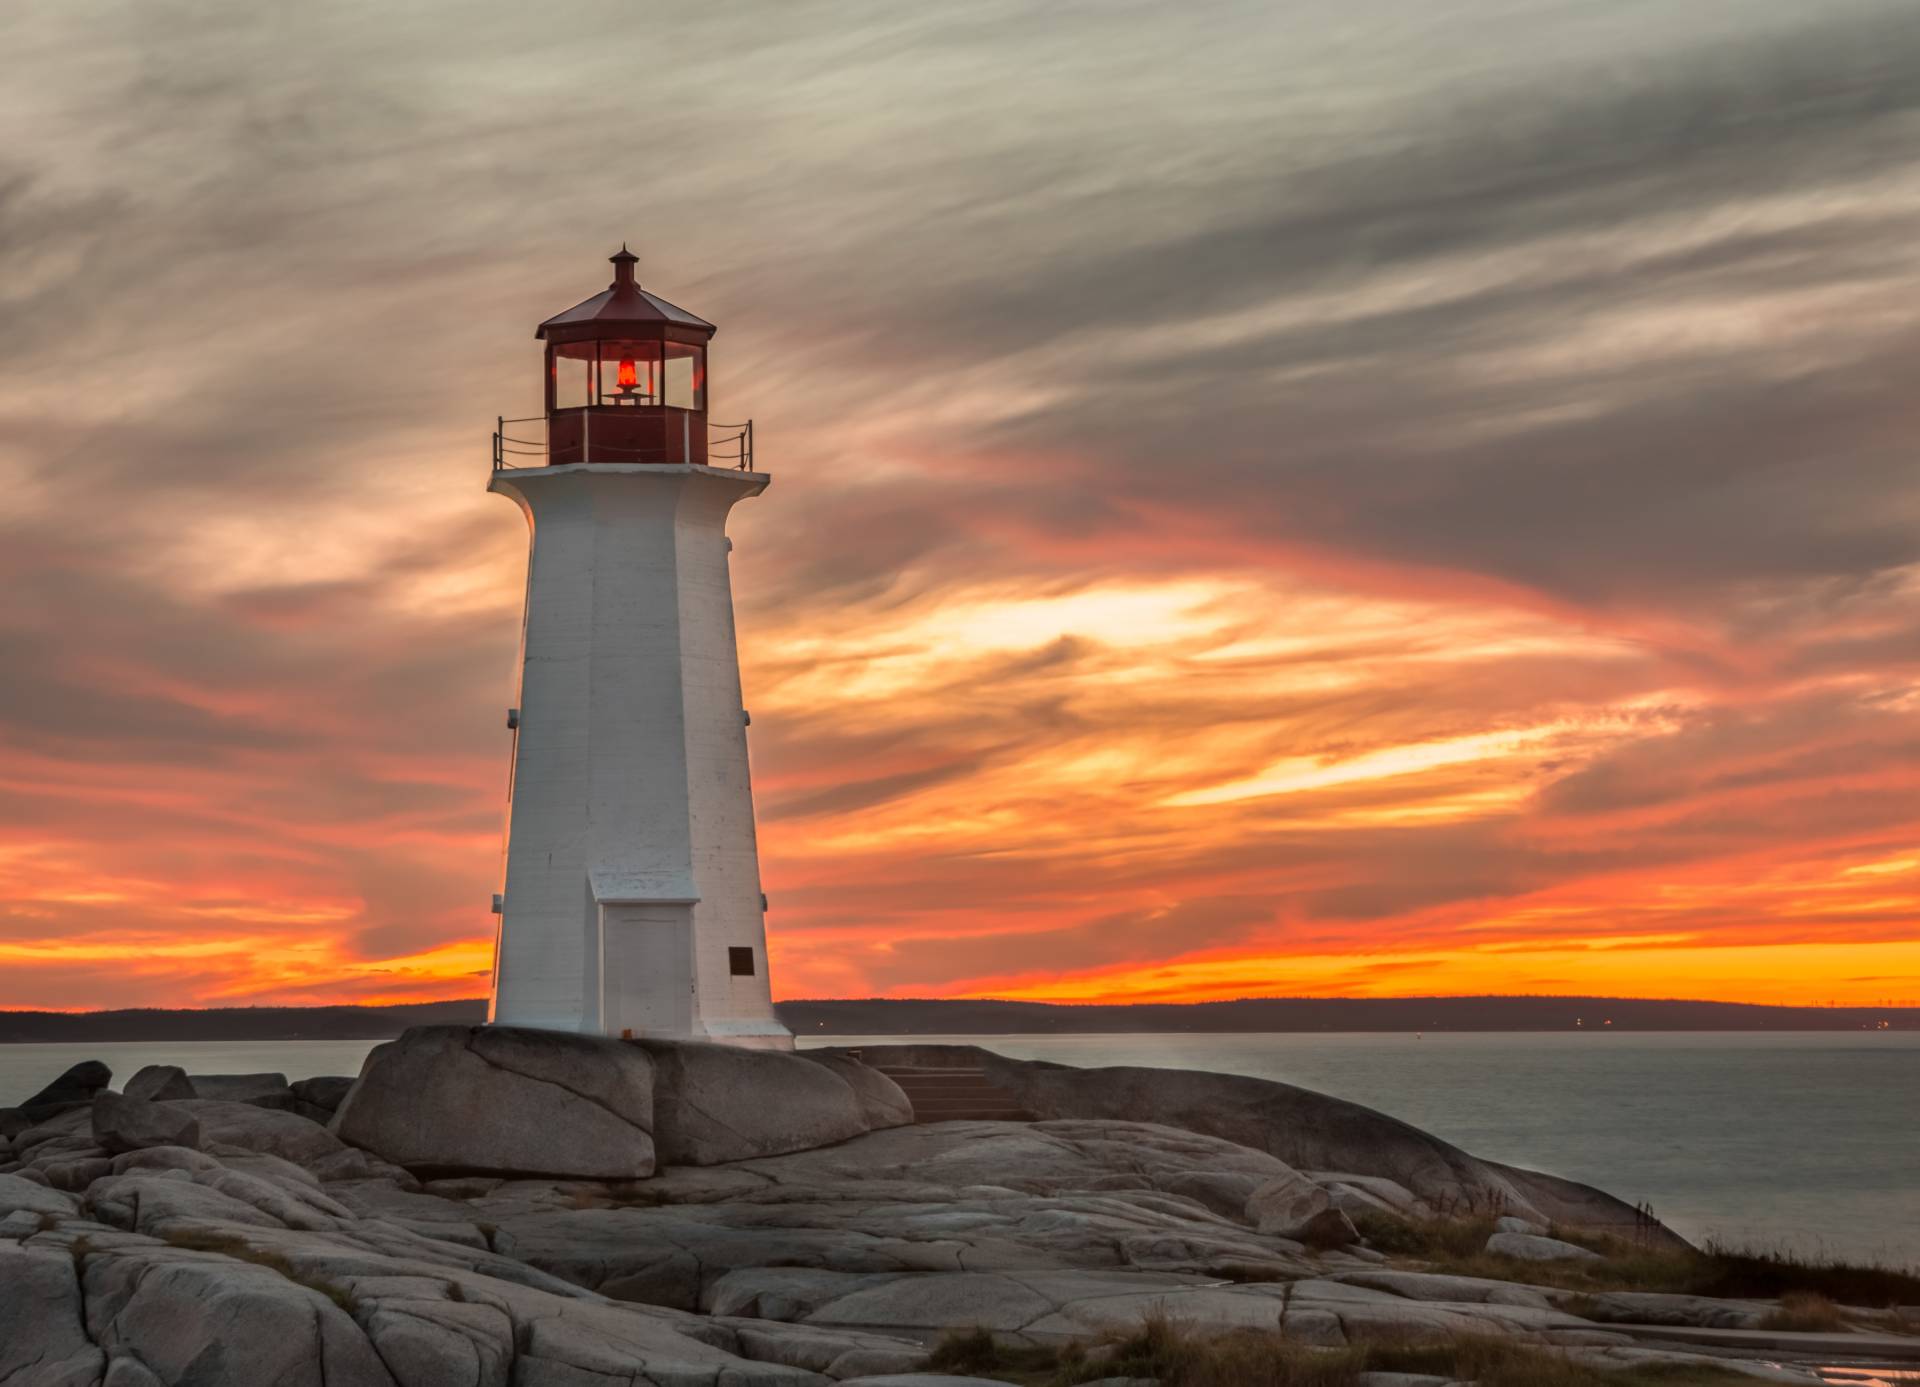 Papermoon Fototapete »Lighthouse Peggy Cove Sunset« von Papermoon